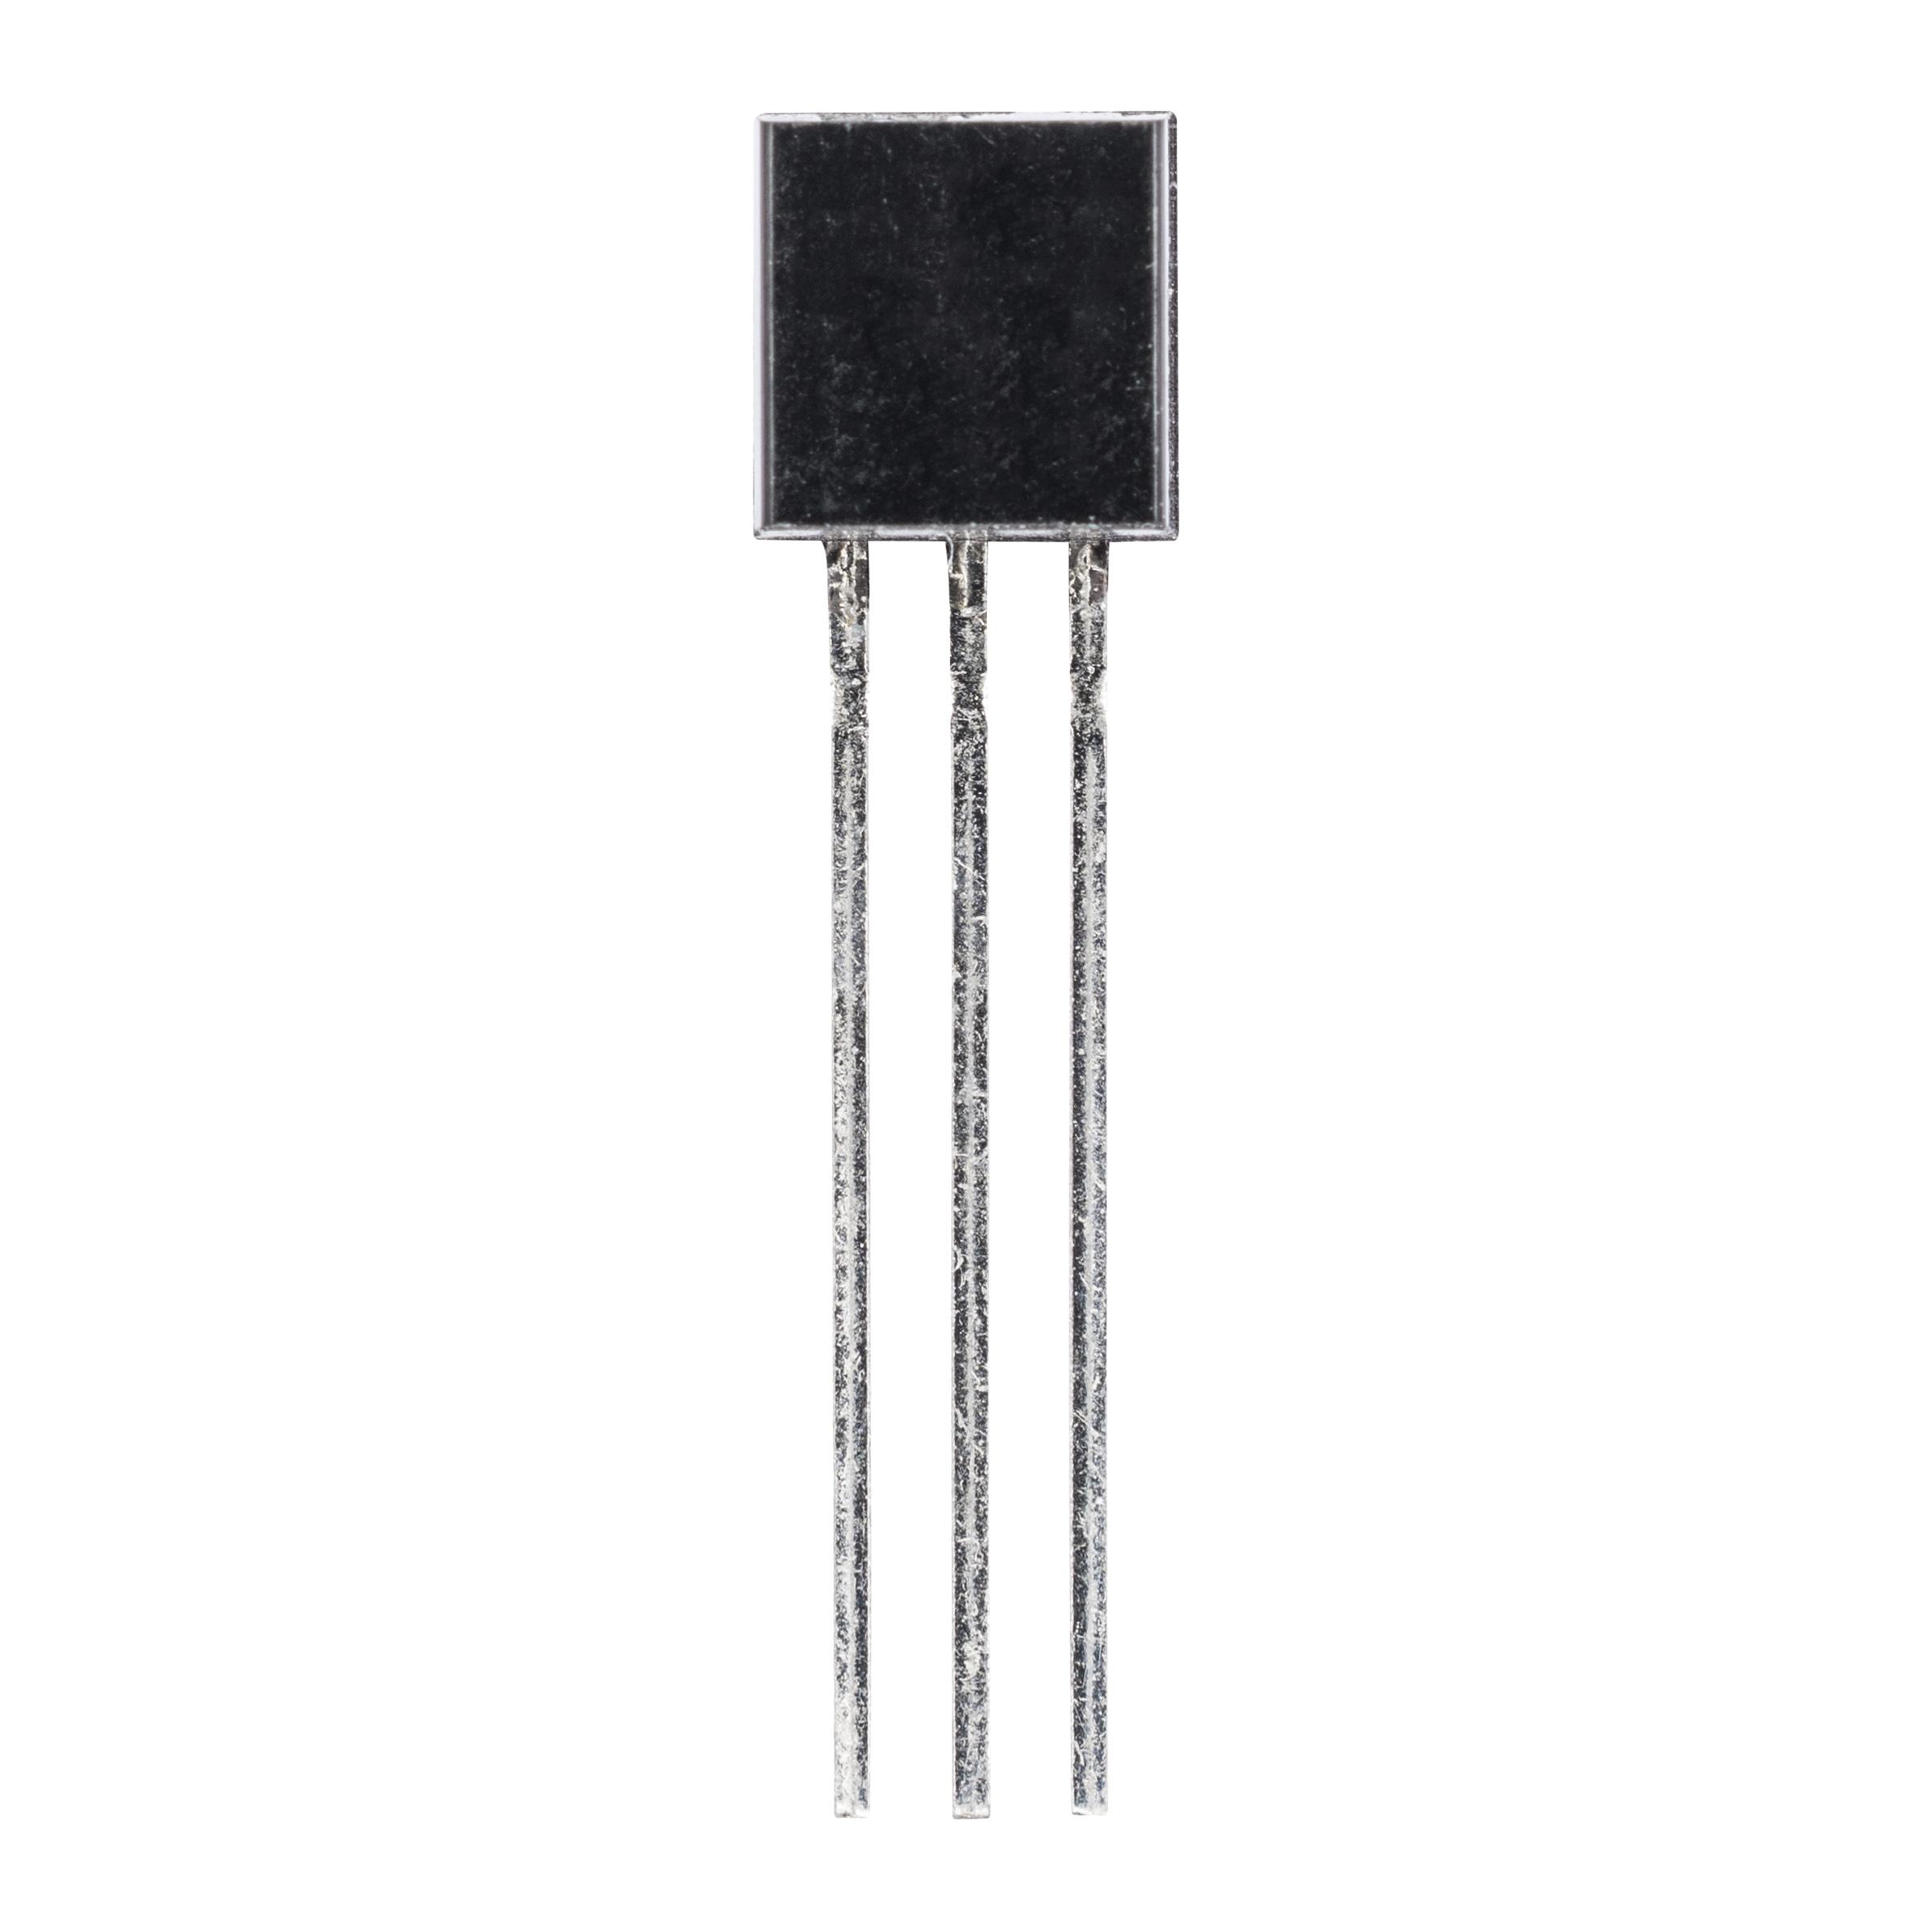 PHILIPS BC327-25 BJT PNP 45V 0.5A TO-92 transistor Qty-25